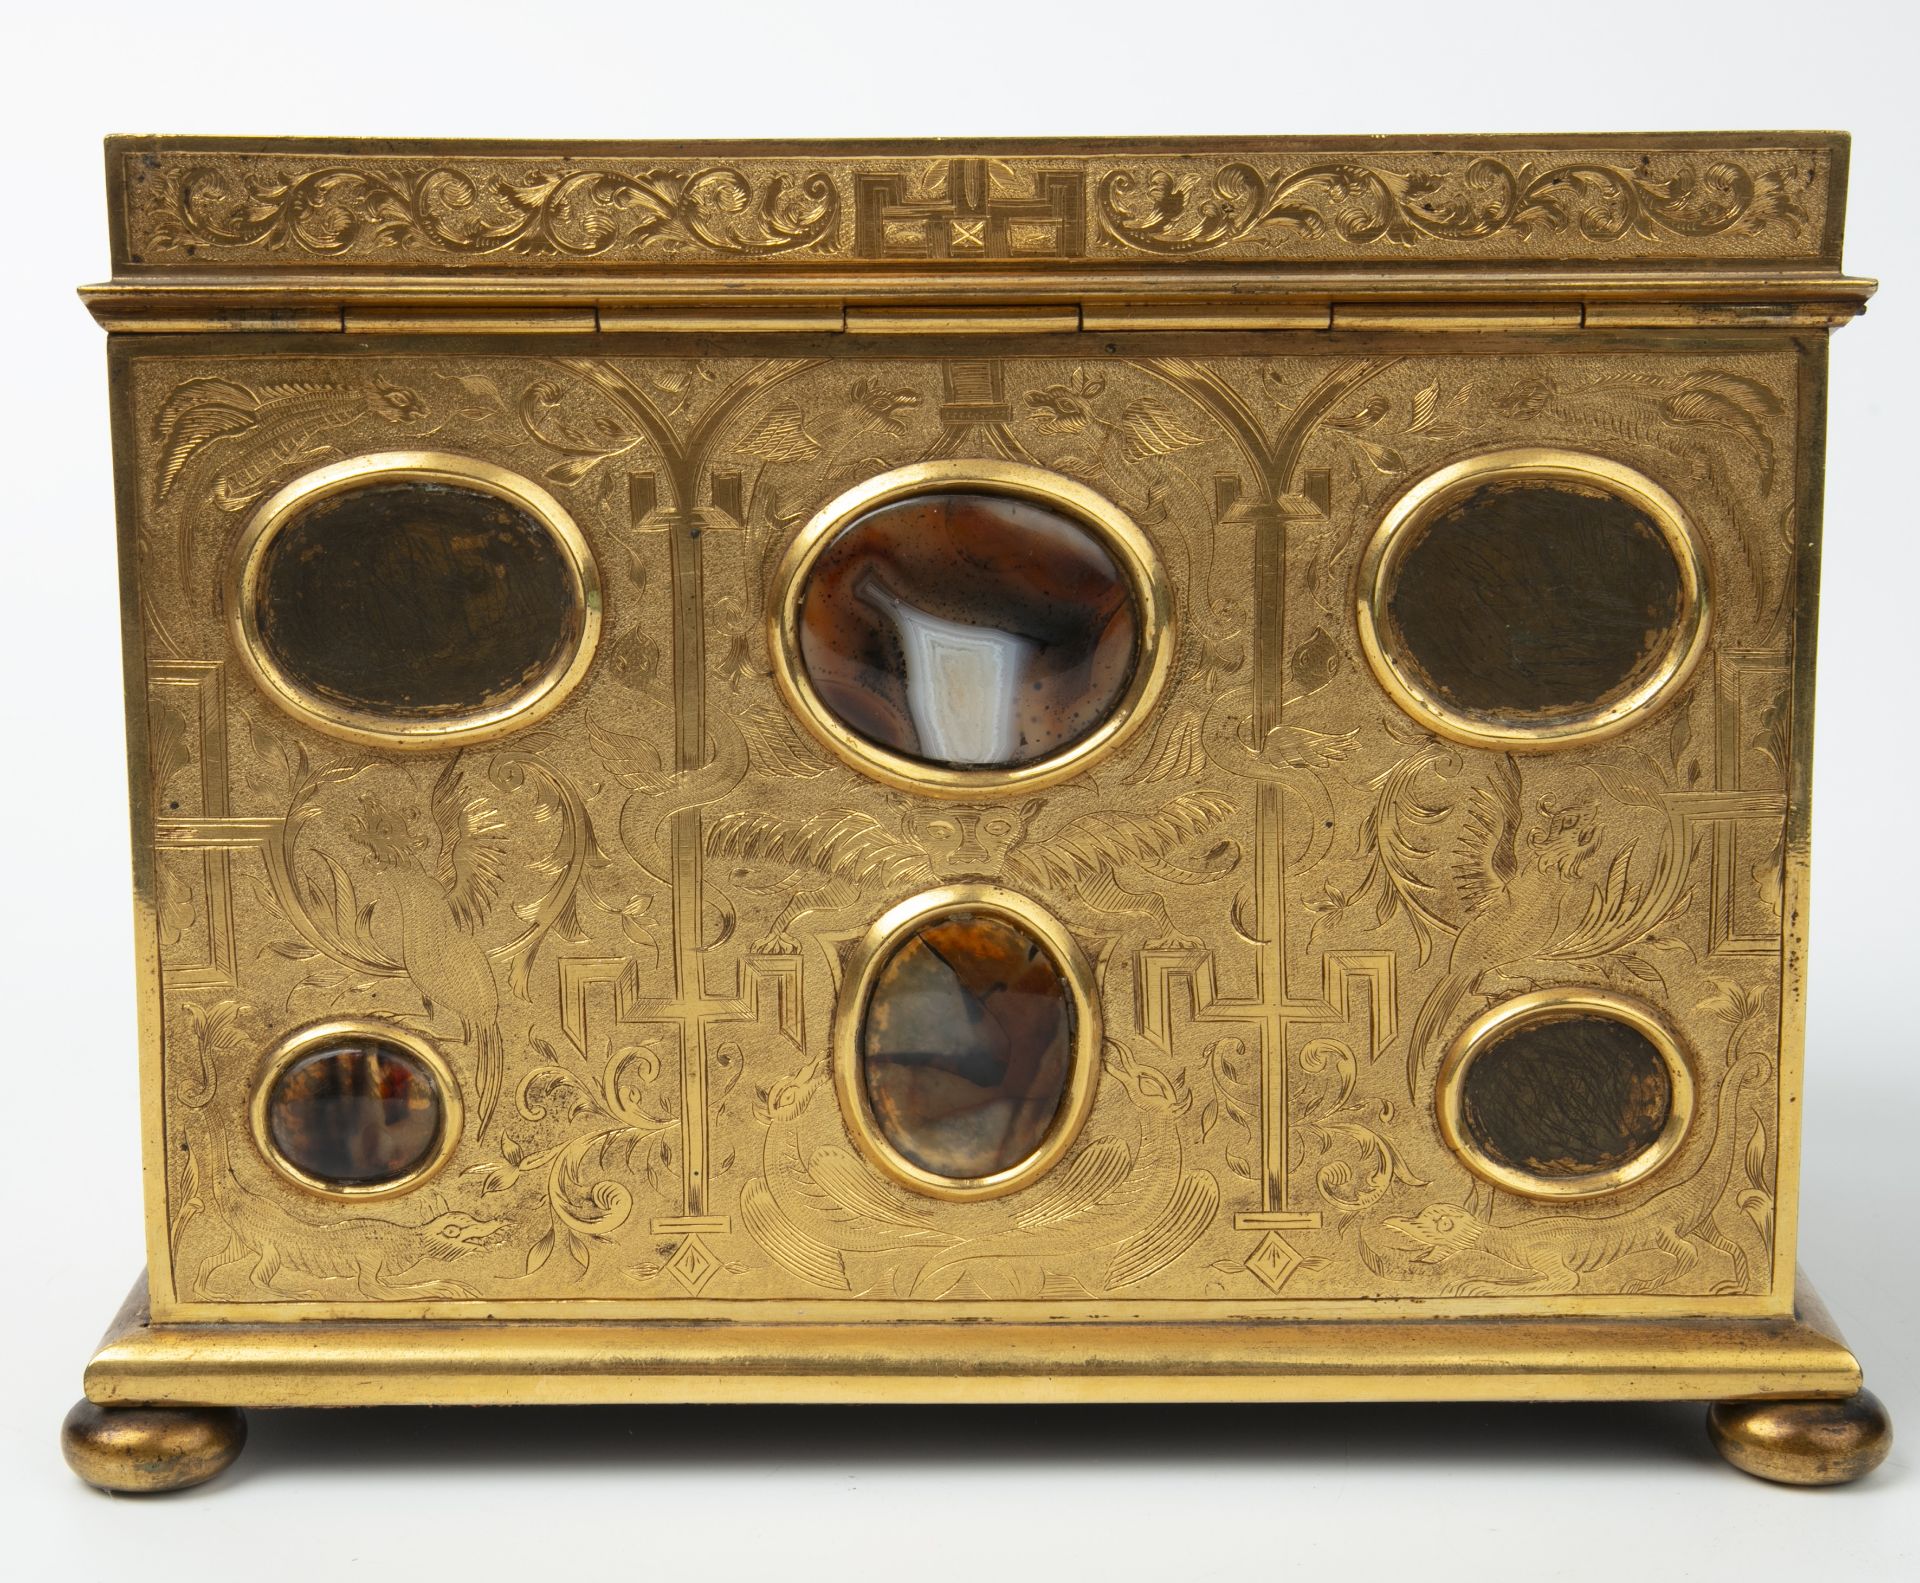 A 19th century correspondence gilt box with engraved decoration and inset cabochon stones hardstones - Bild 5 aus 25